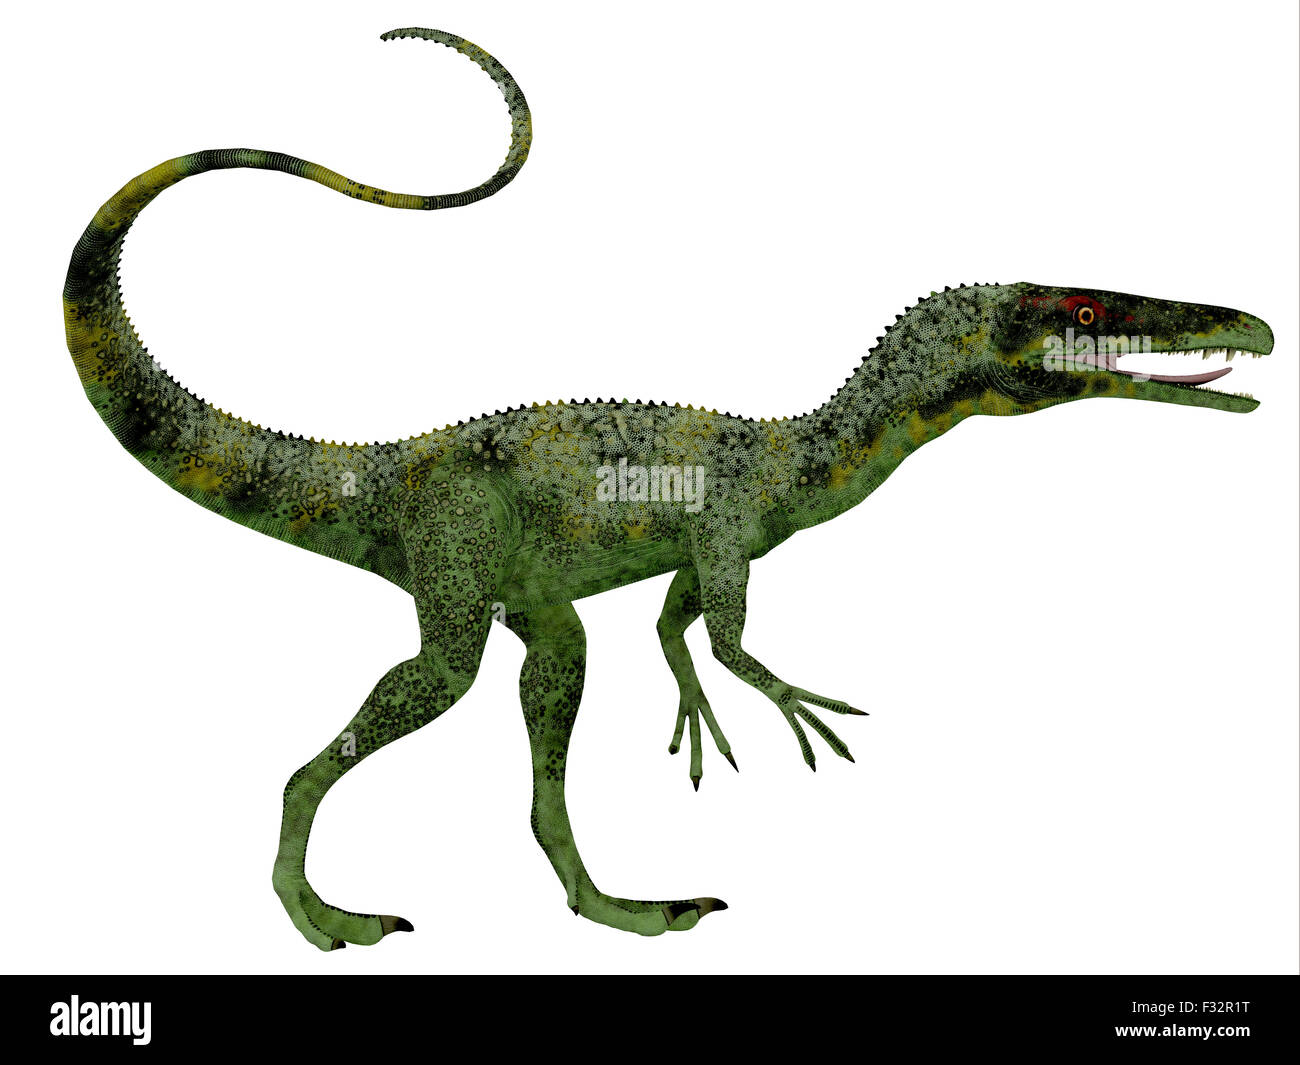 Juravenator was a small carnivorous dinosaur that lived in Germany during the Jurassic Period. Stock Photo